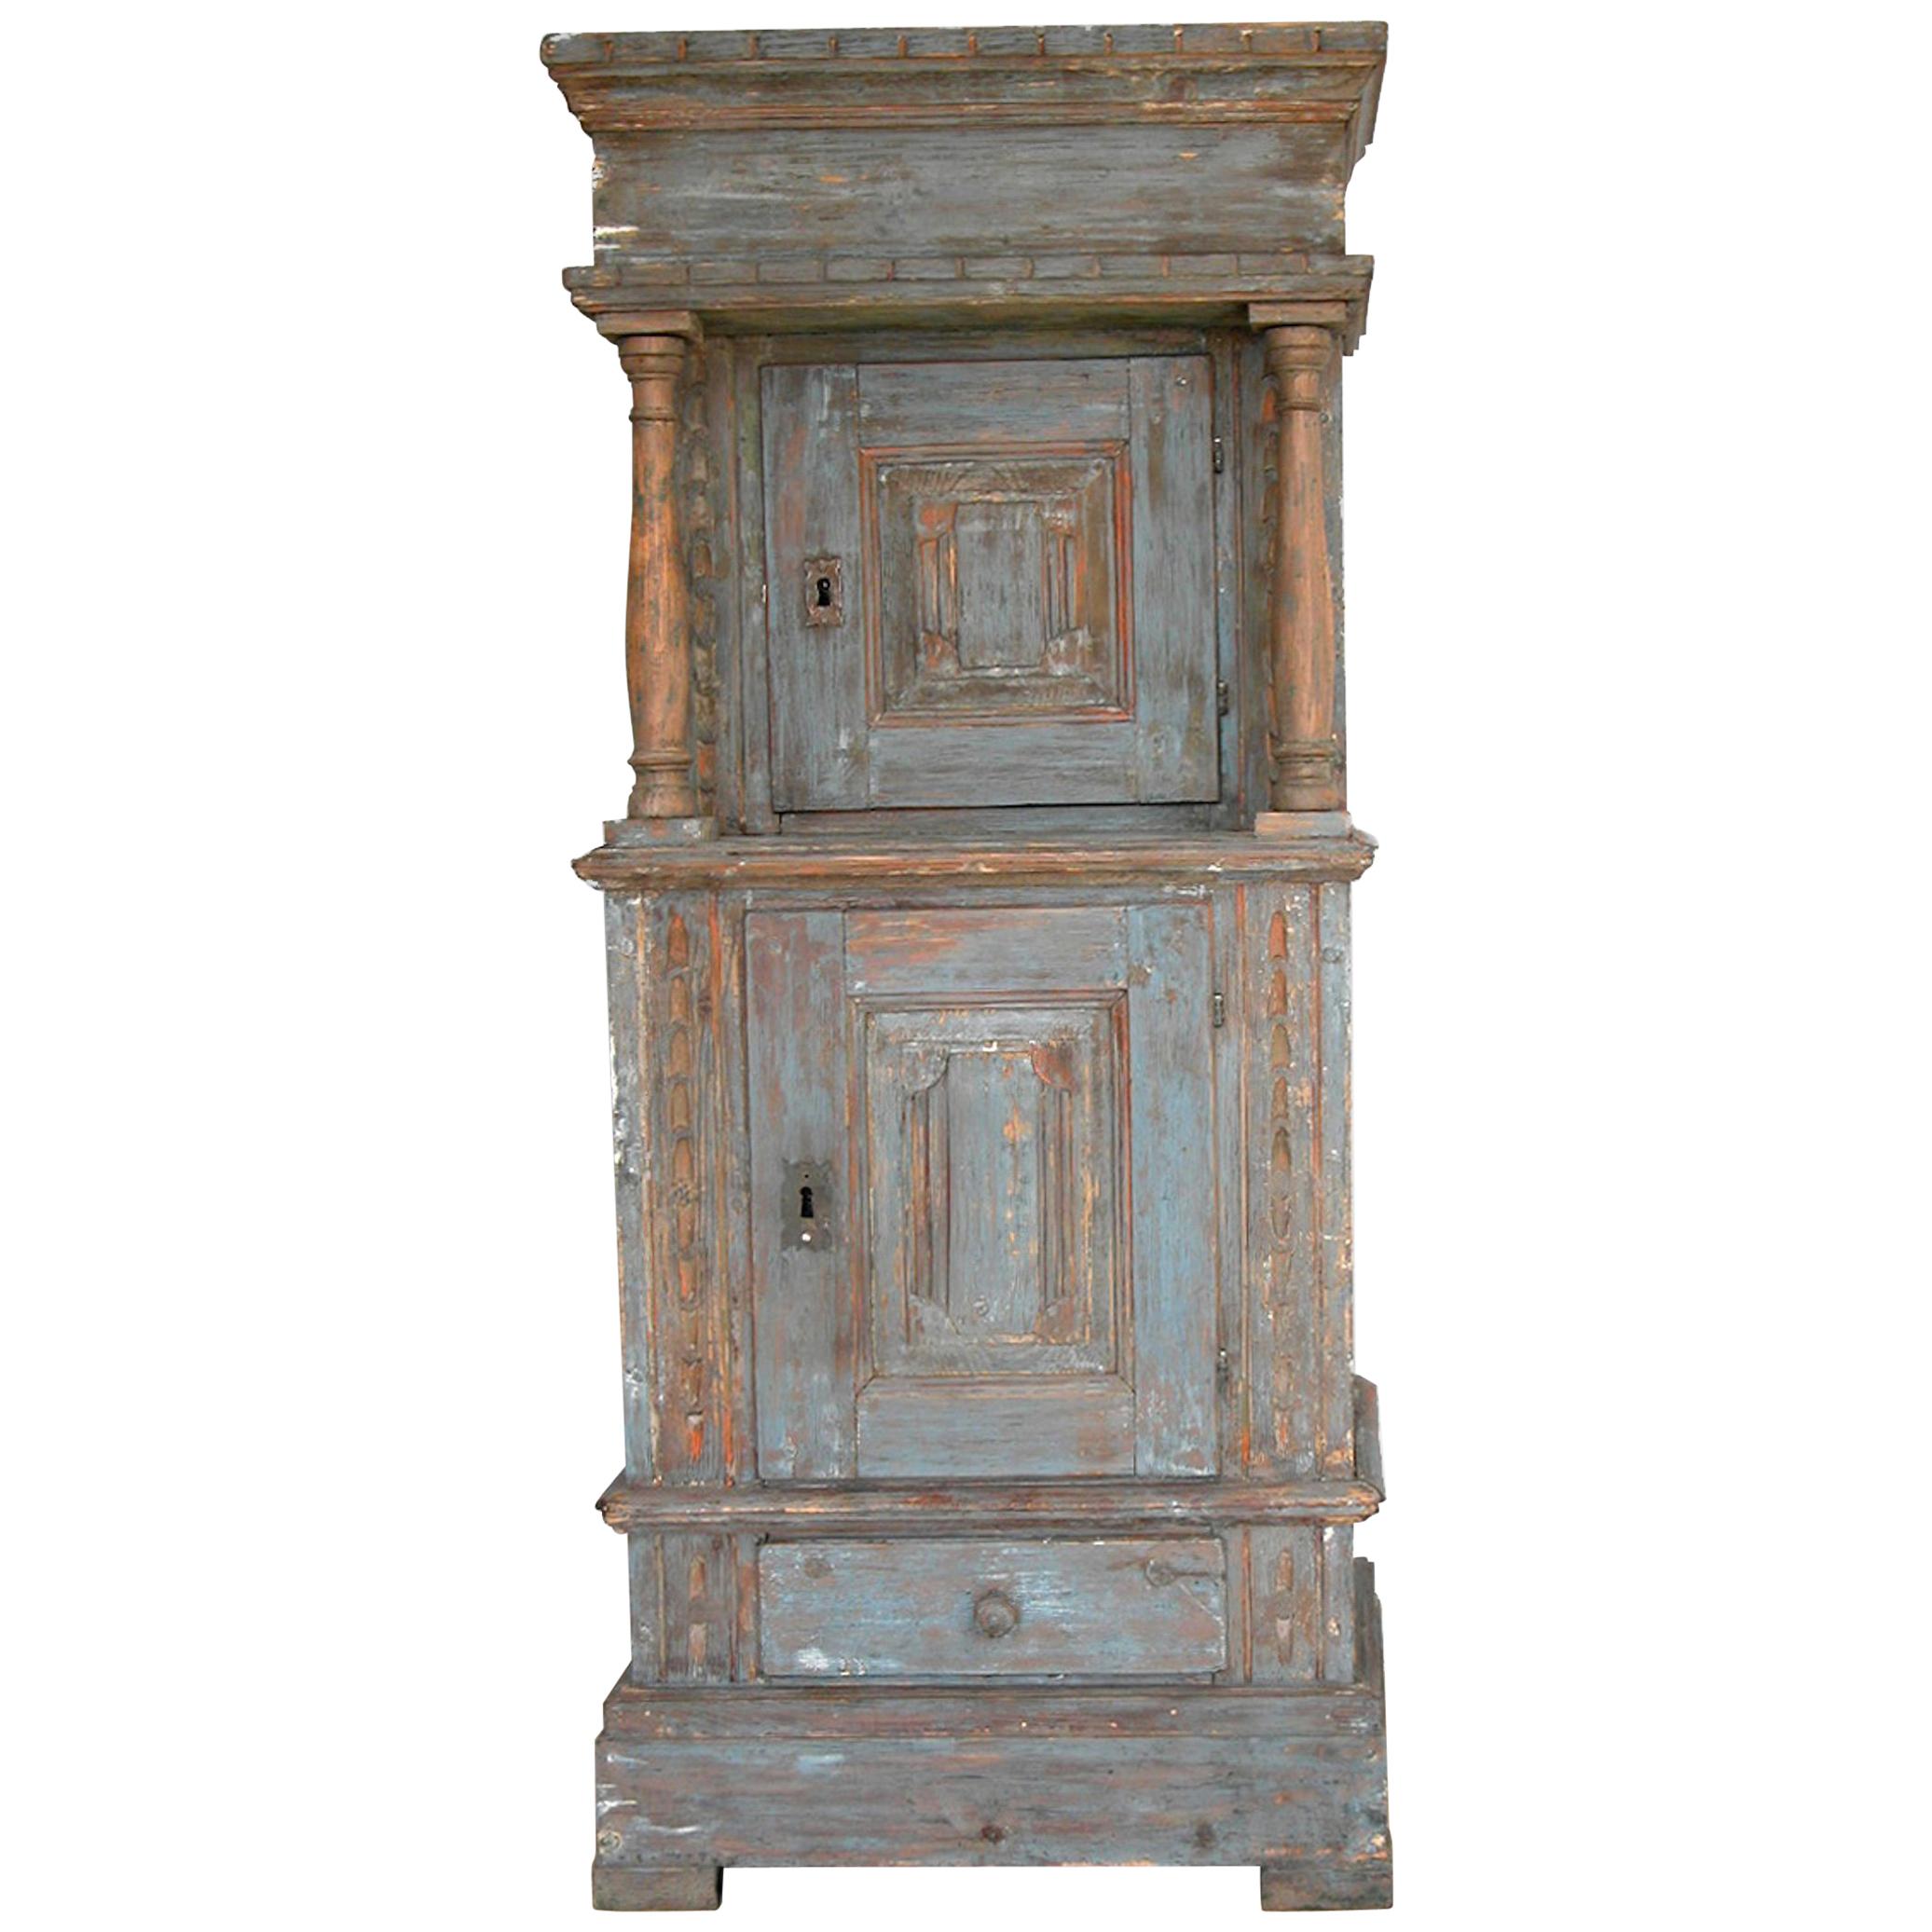 Renaissance-Revival Danish Cabinet in Blue Paint with Red Interior, ca. 1750